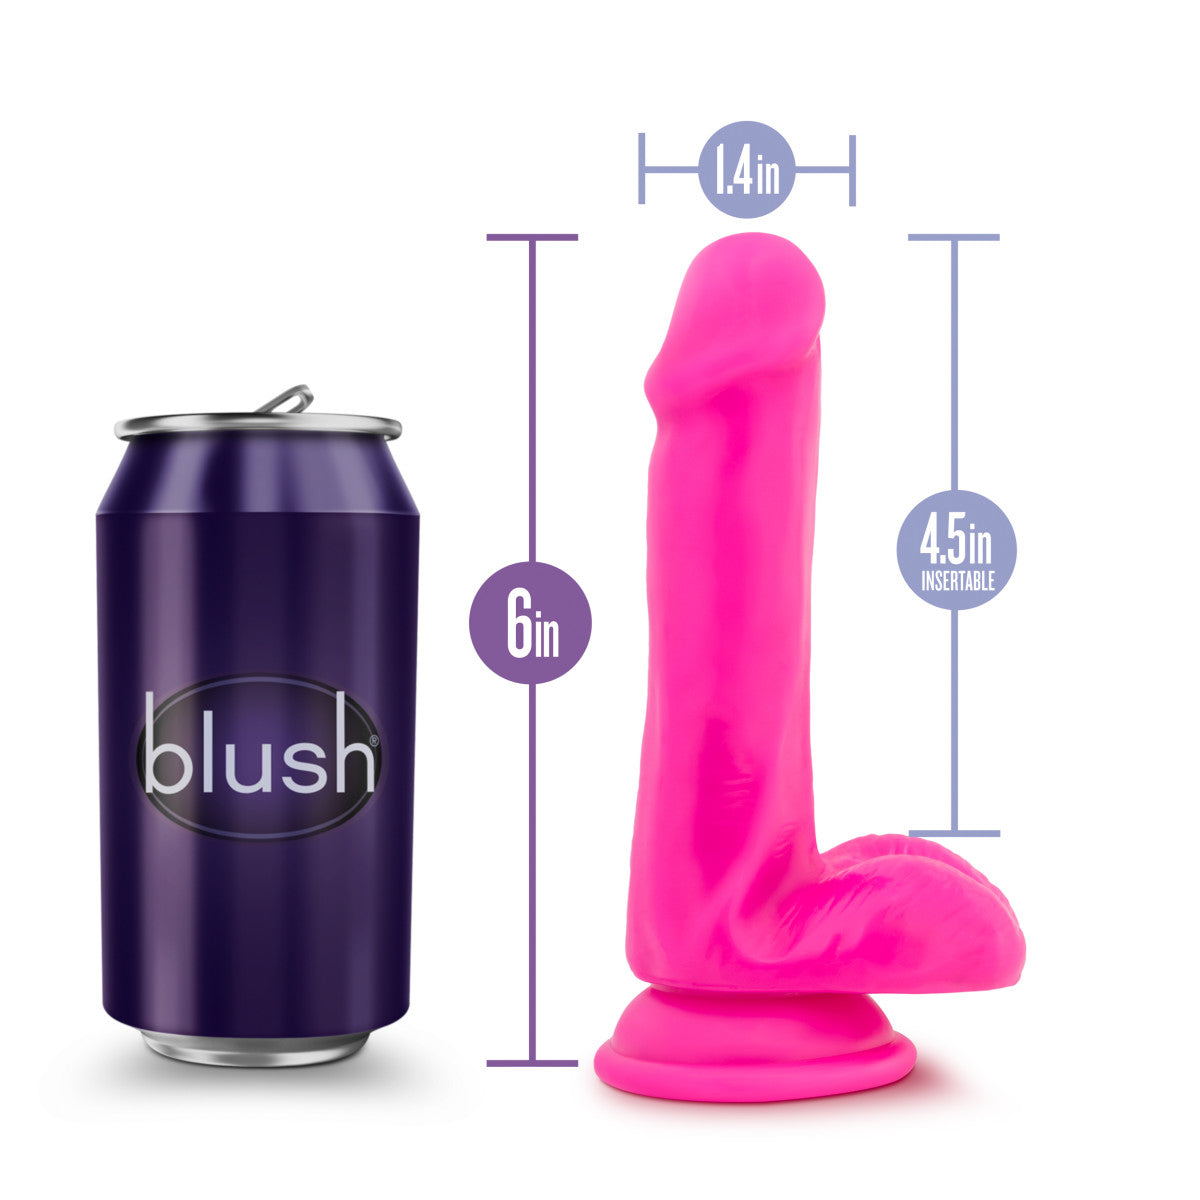 Pink realistic dildo with a rounded head, veins along a straight but flexible shaft, realistic balls, and a suction cup base. Additional images show alternate angles.